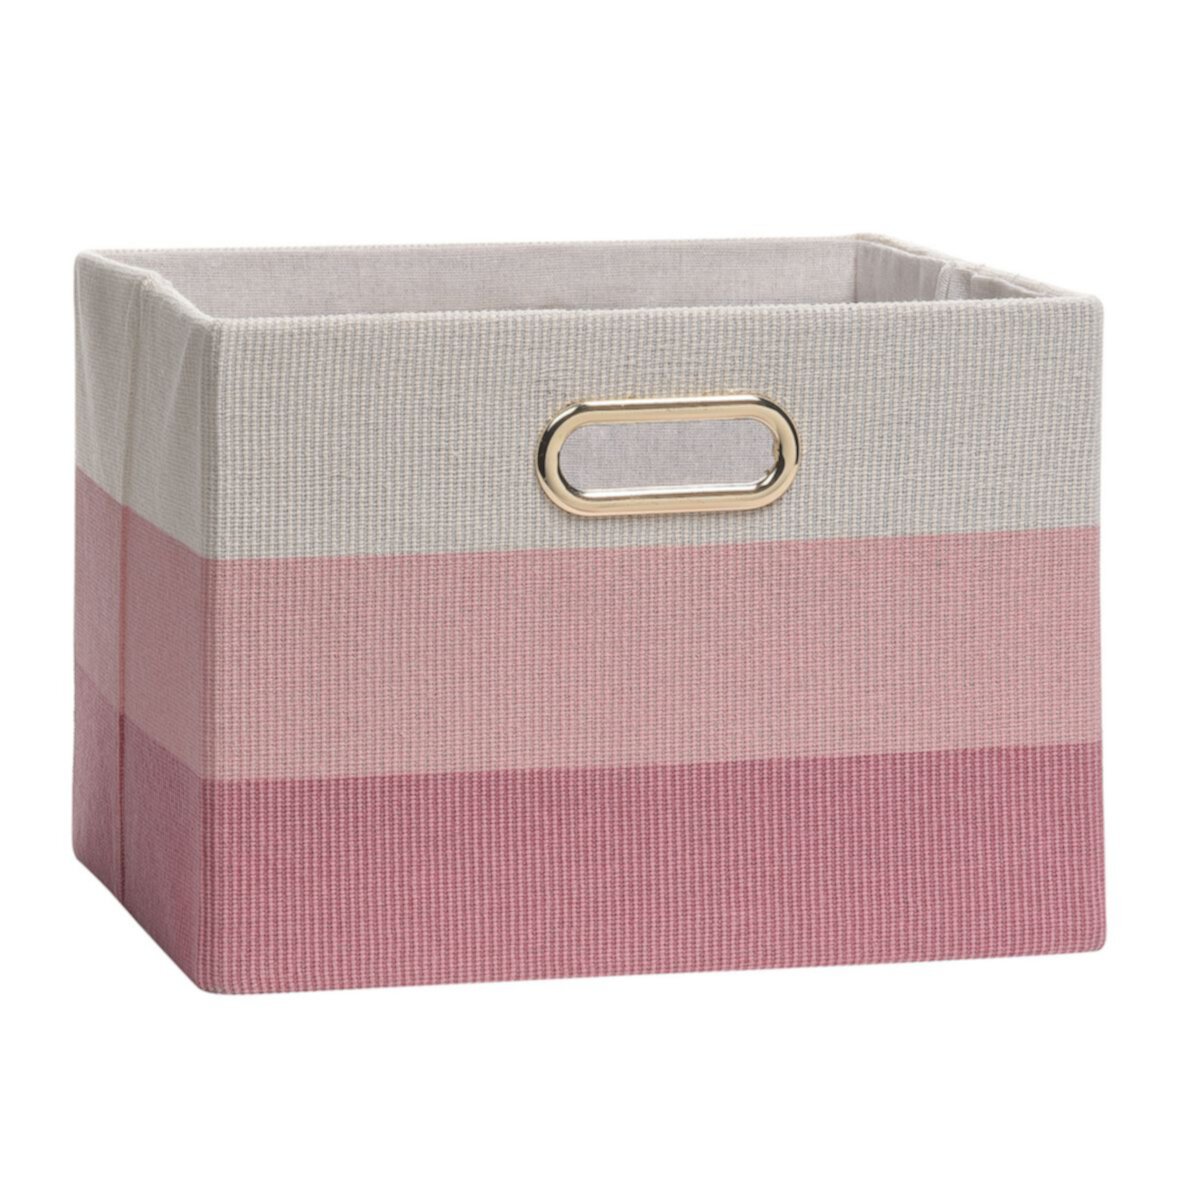 Lambs & Ivy Pink Ombre Foldable/collapsible Storage Bin/basket Lambs & Ivy